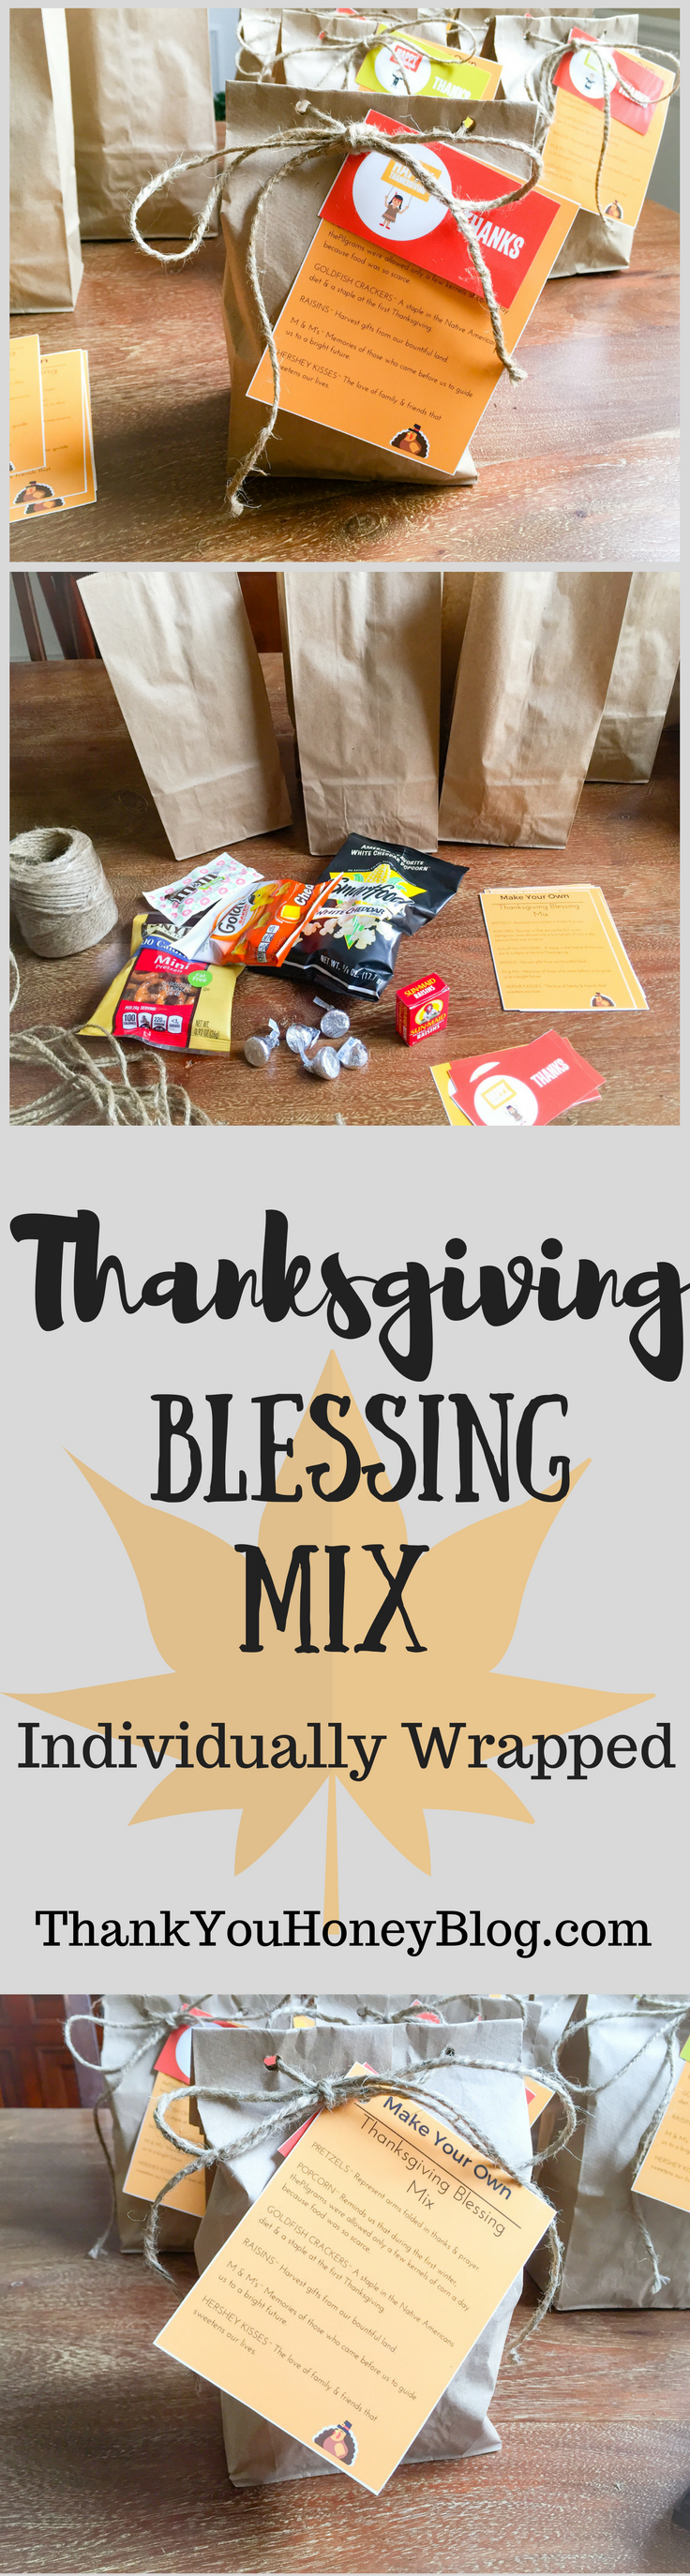 Thanksgiving Blessing Mix Individually Wrapped